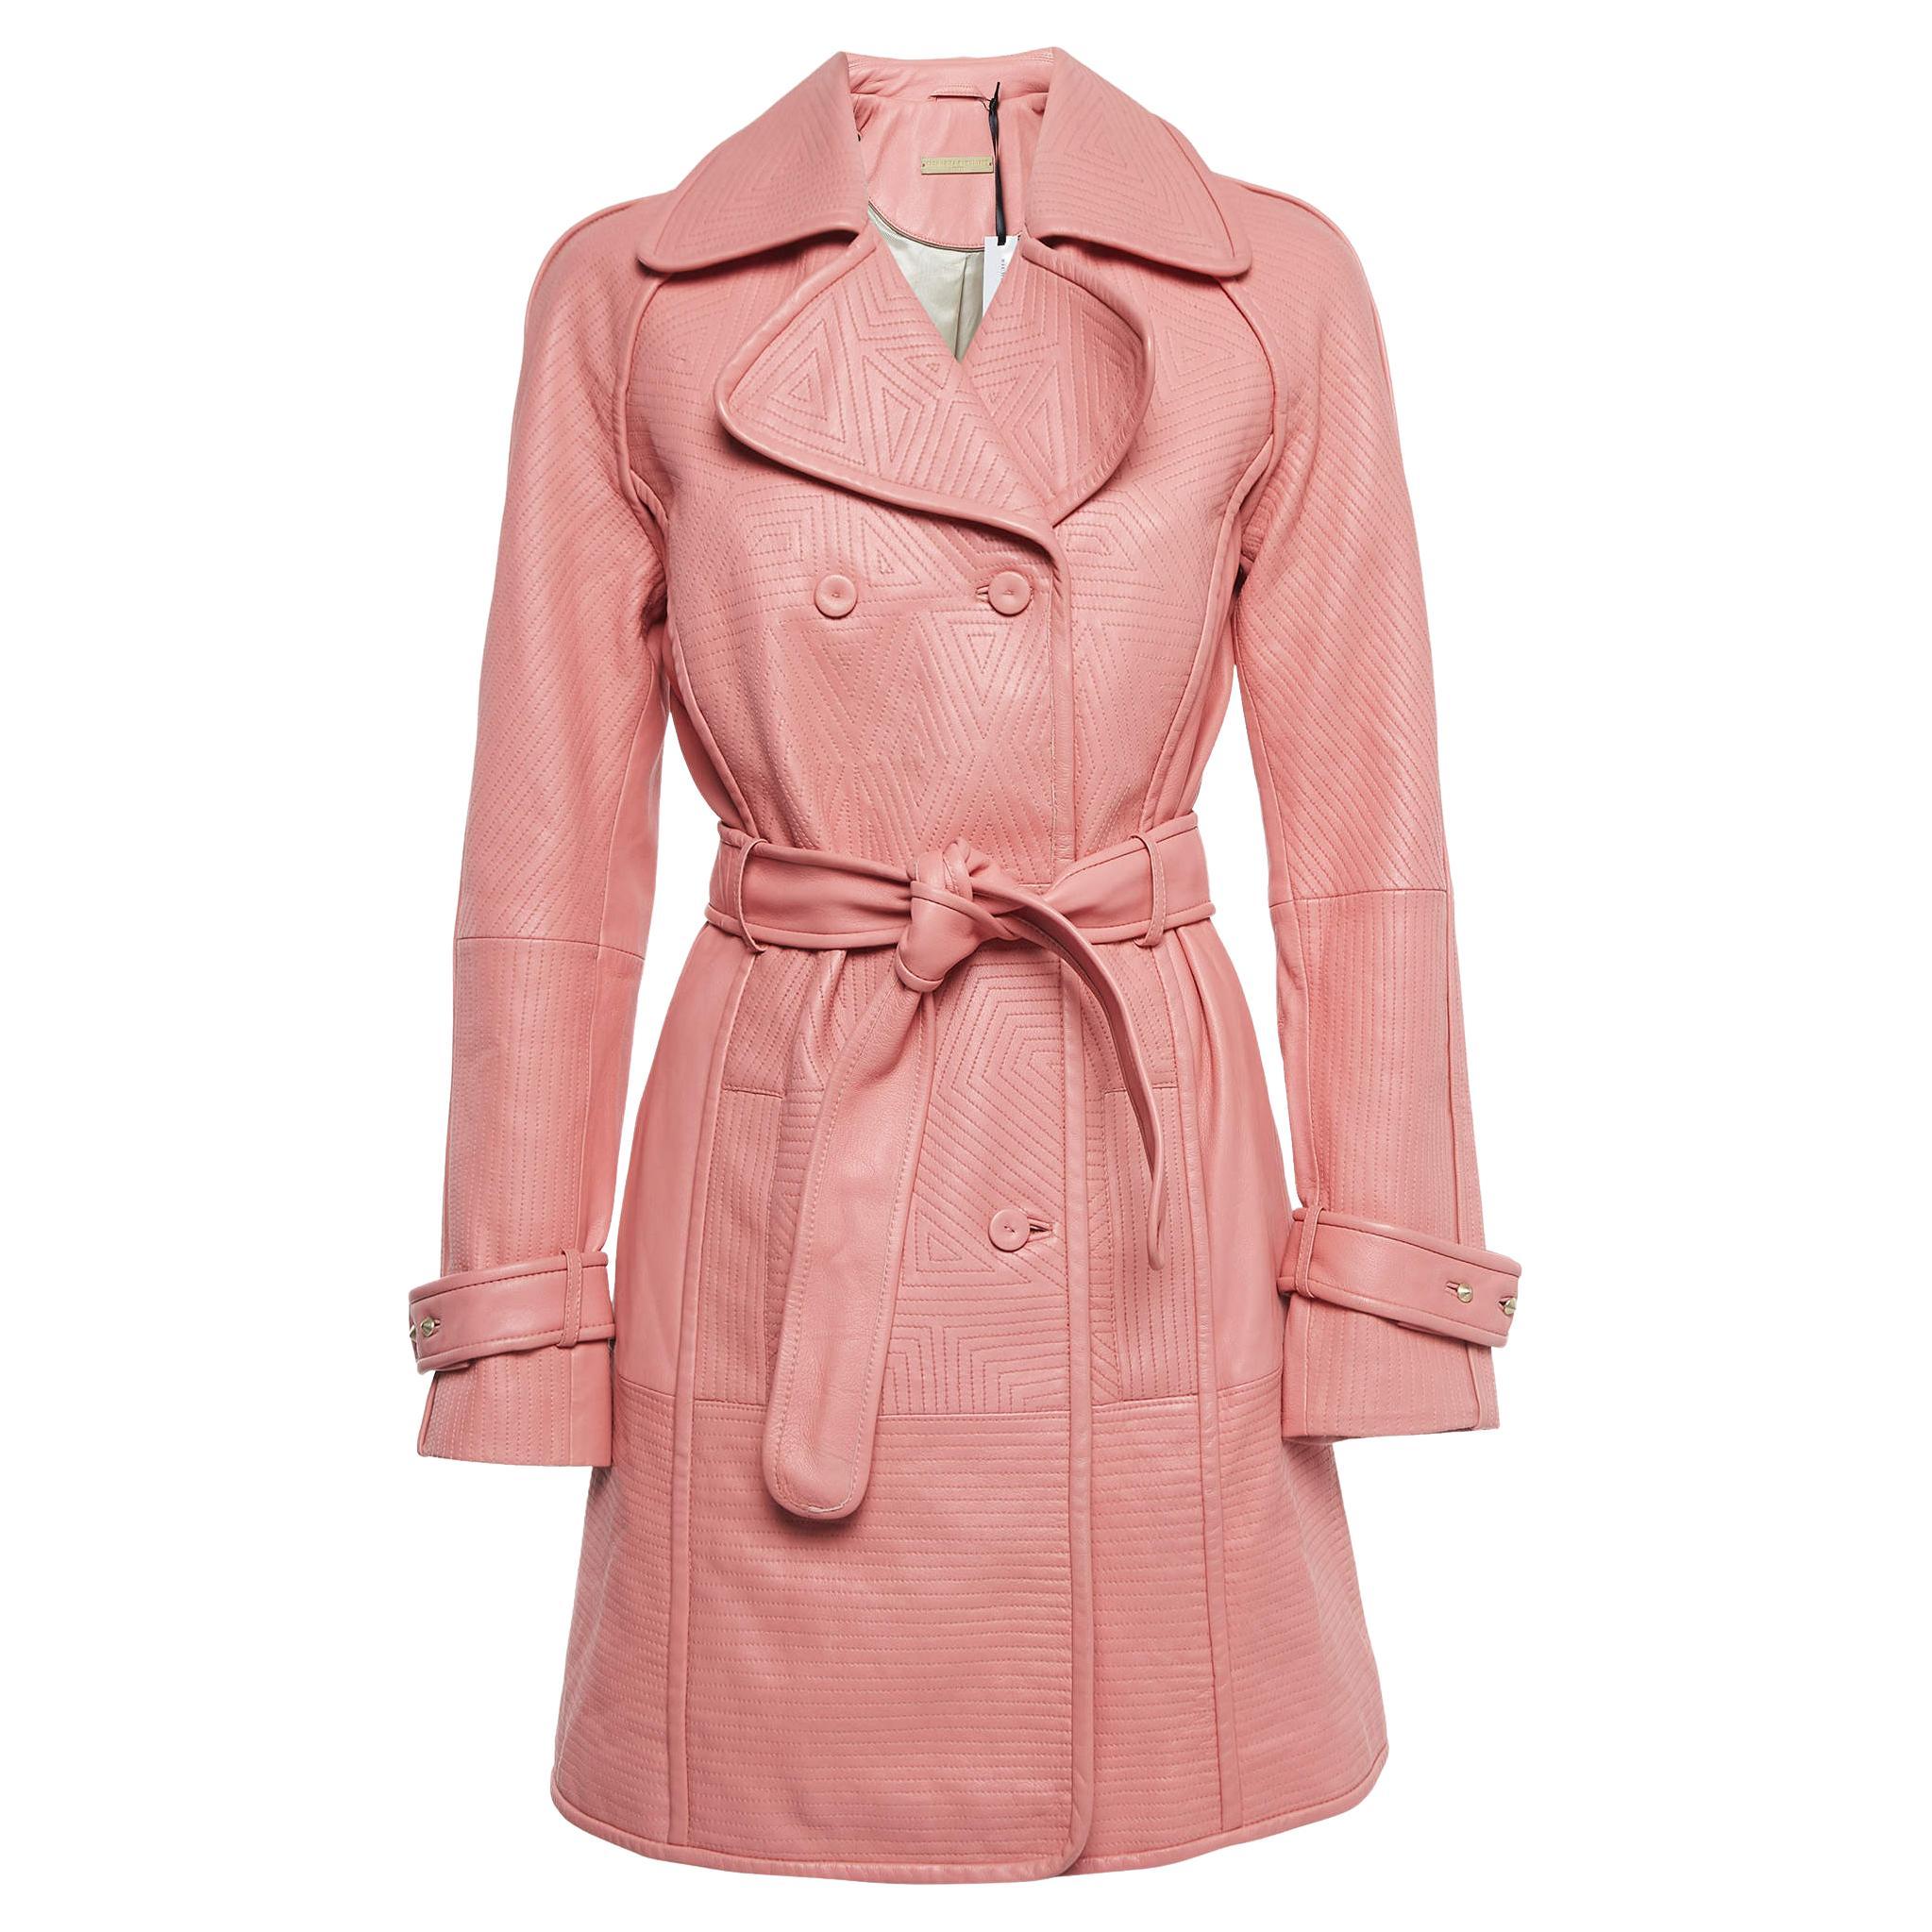 Richards Radcliffe Pink Leather Double Breasted Trench Coat M